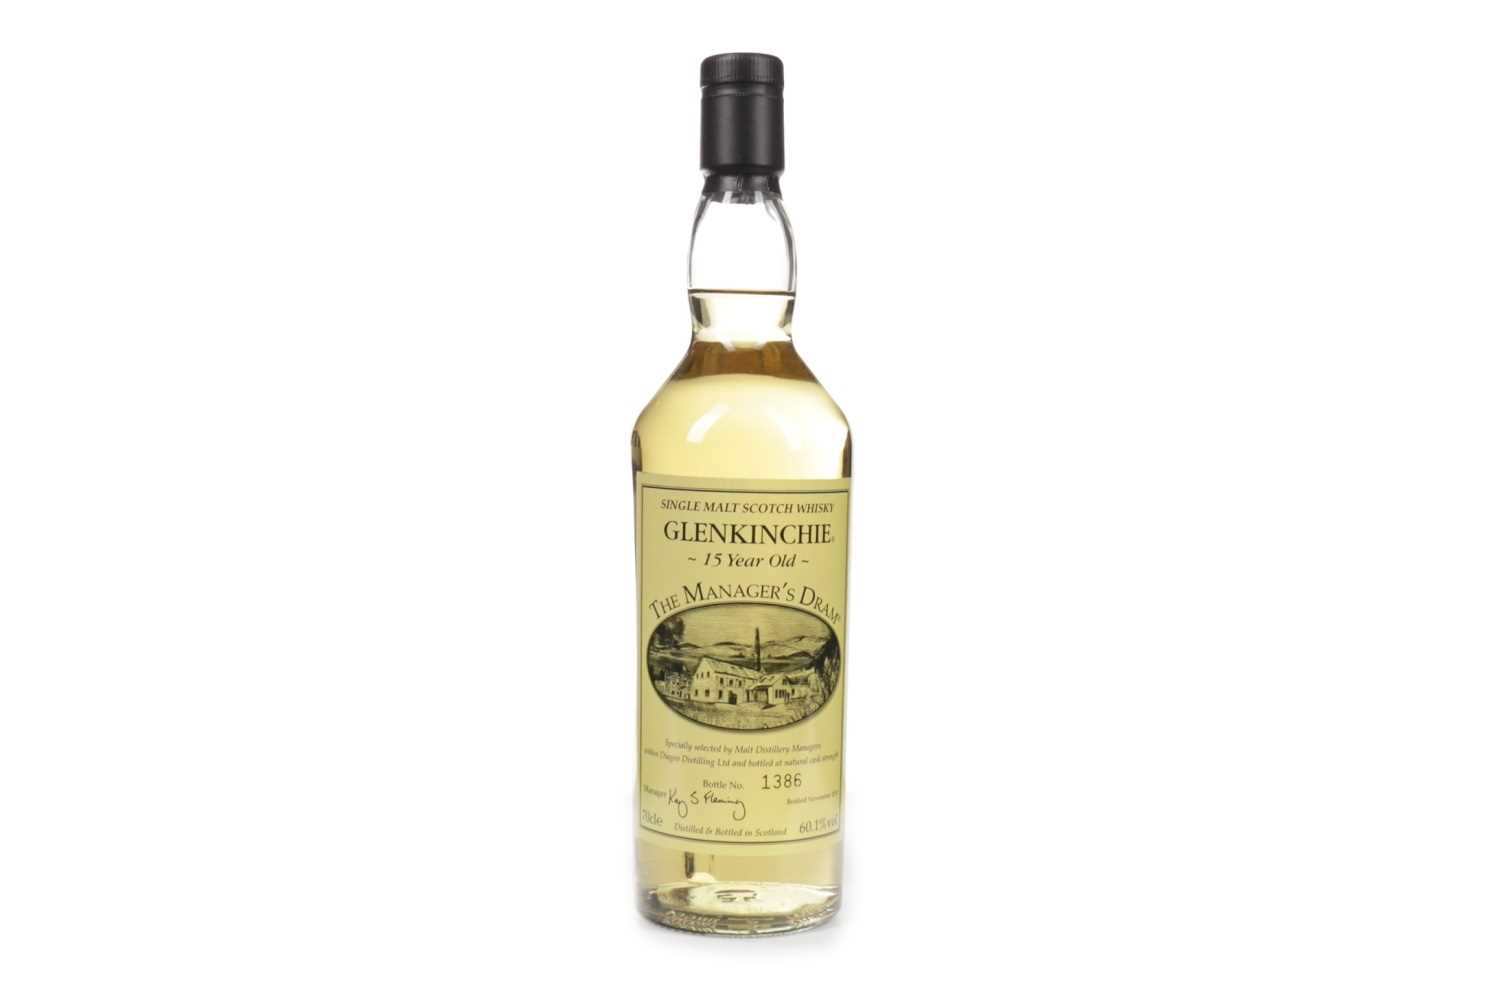 Lot 97 - GLENKINCHIE THE MANAGERS DRAM AGED 15 YEARS